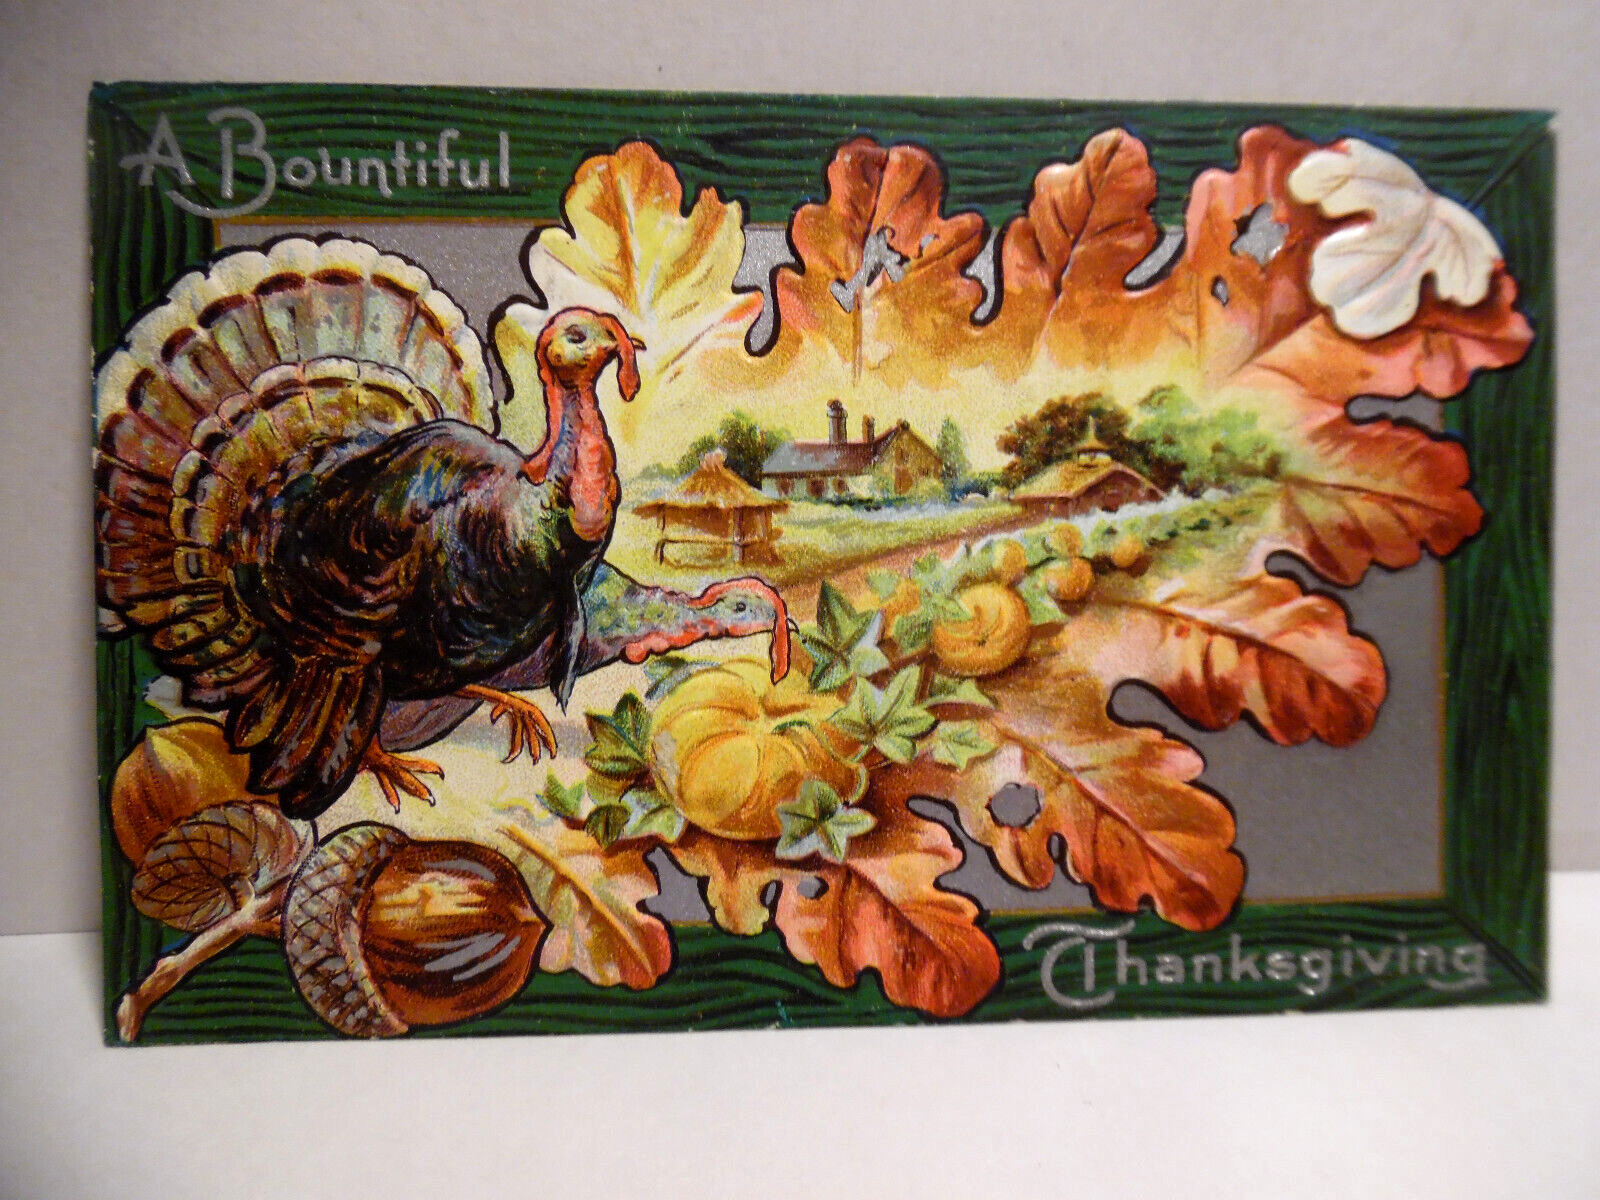 PC 2607 - THANKSGIVING POSTCARD - TURKEY IN PASTORAL SETTING FRAMED IN RED LEAF